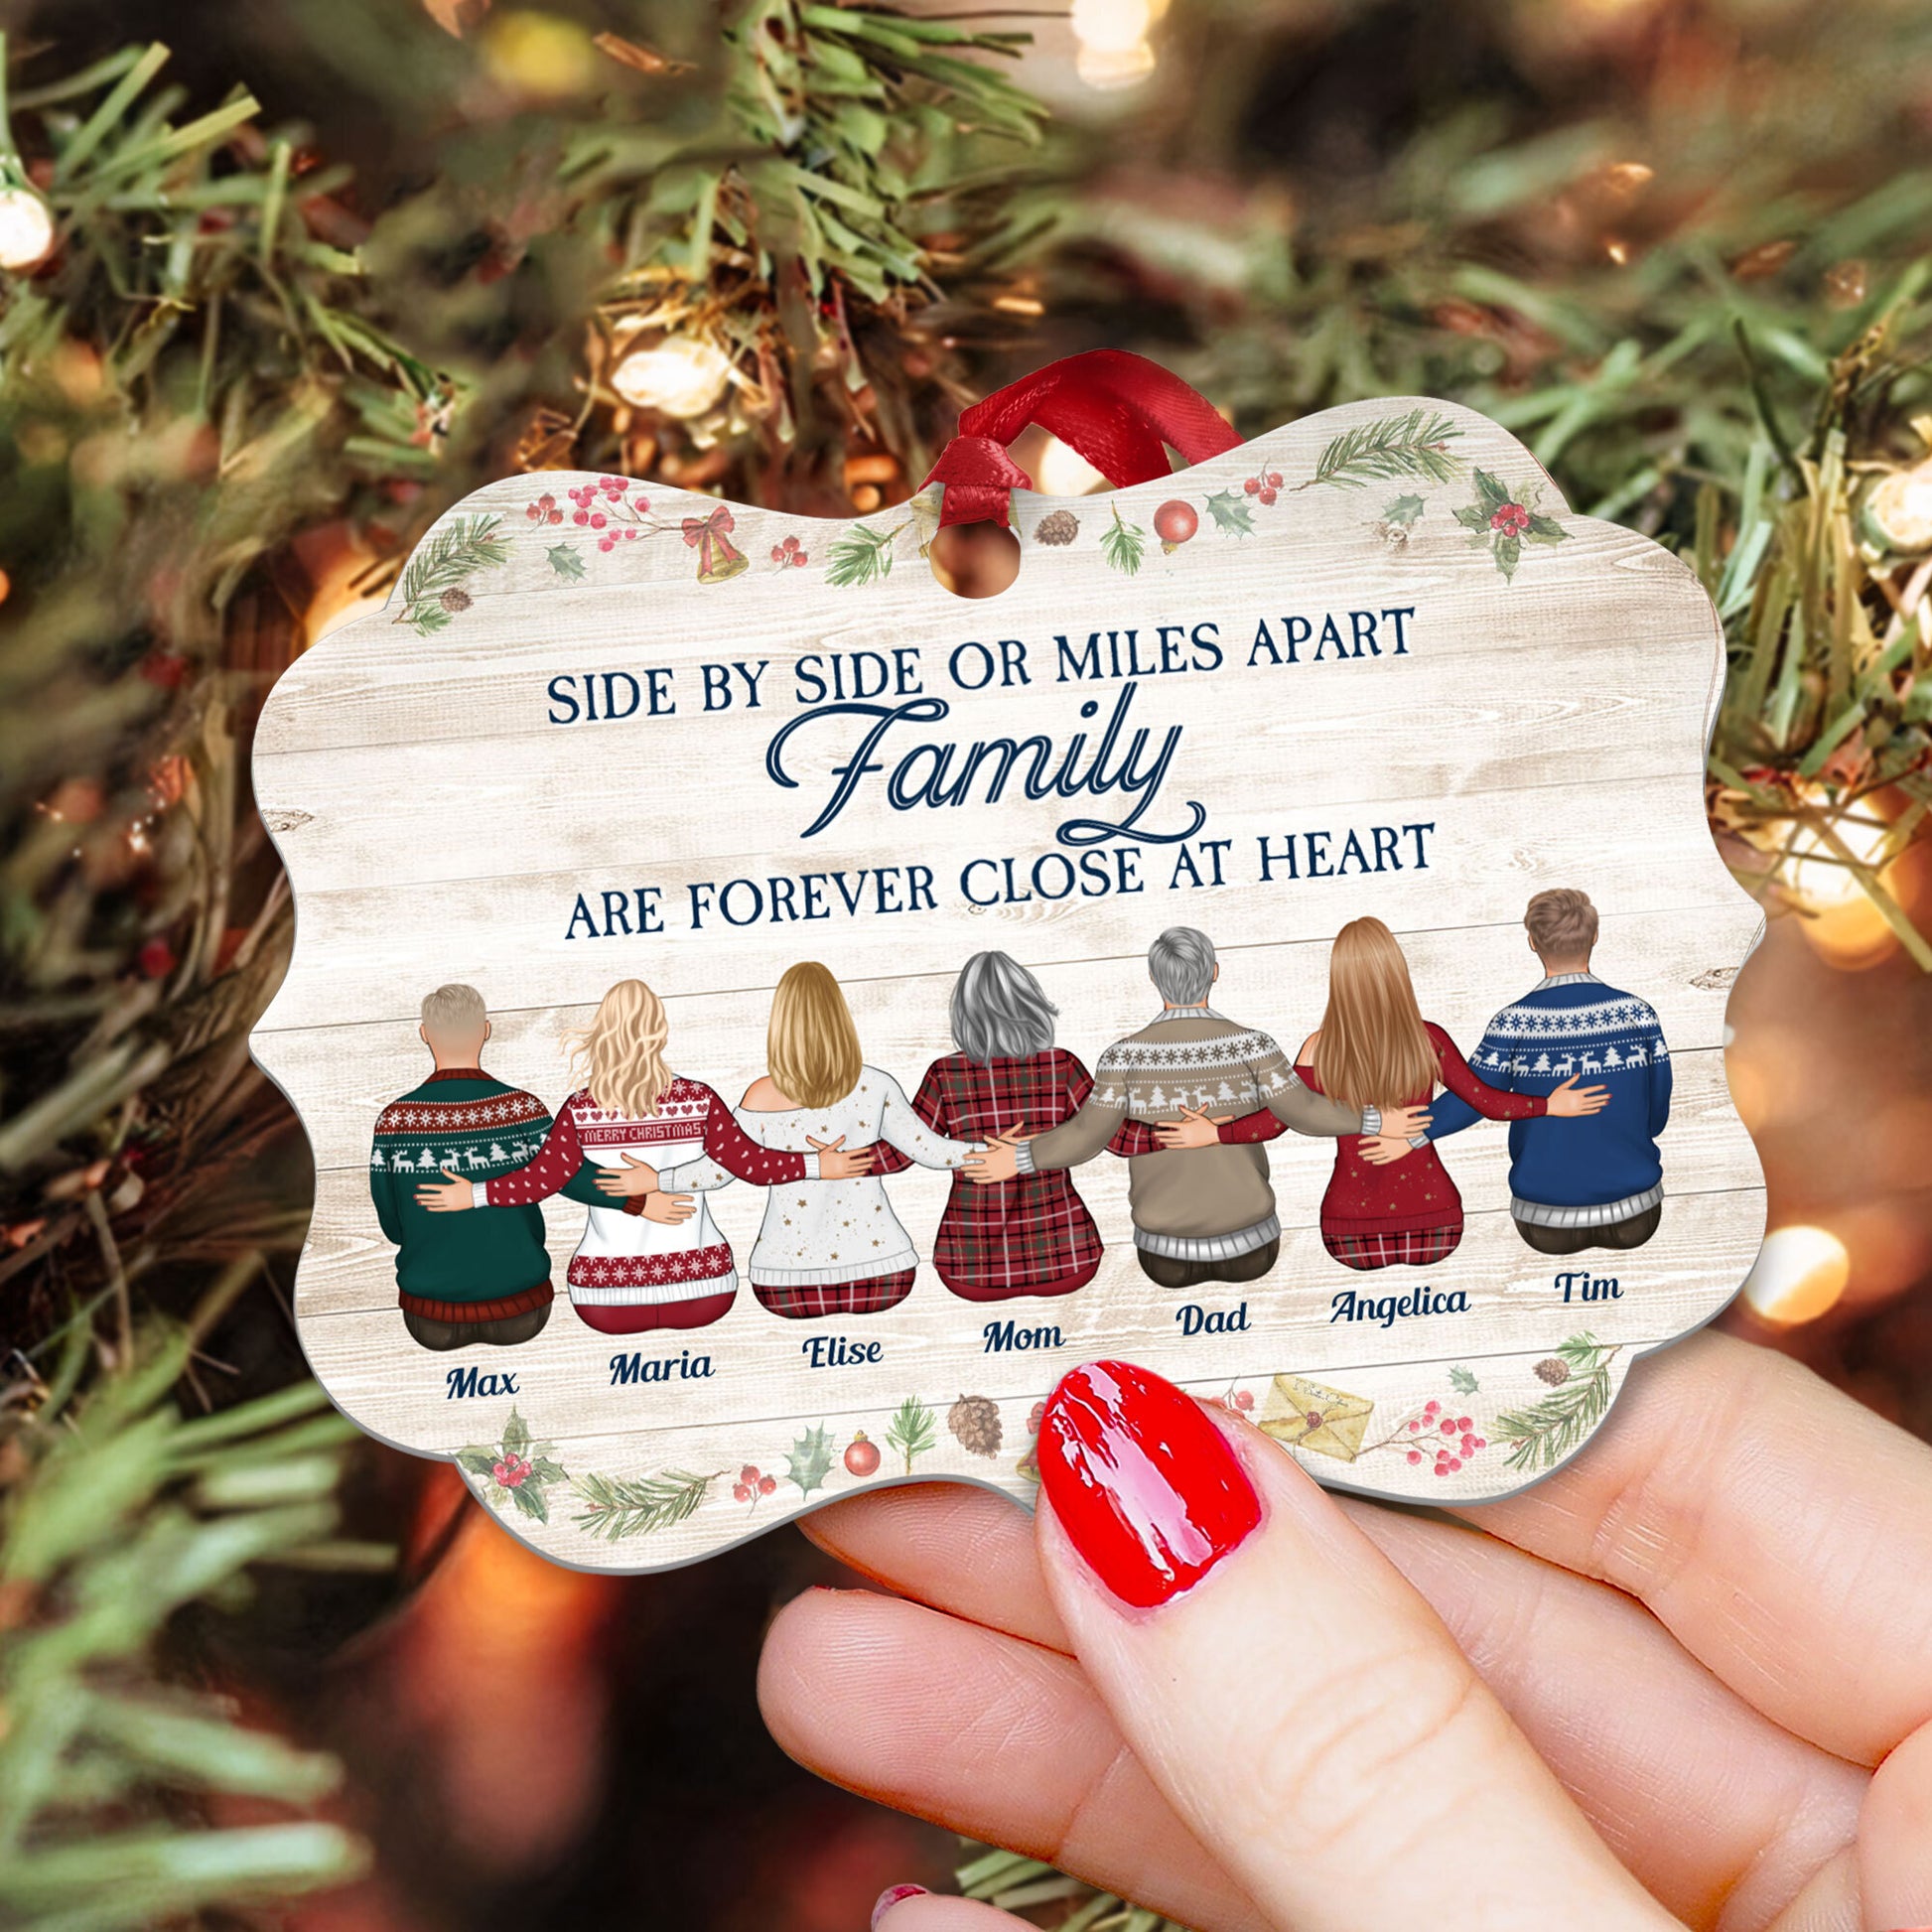 Family Are Forever Close At Heart - Personalized Aluminum Ornament - Christmas Gift Family Ornament For Dad, Mom, Brothers, Sisters - Family Hugging